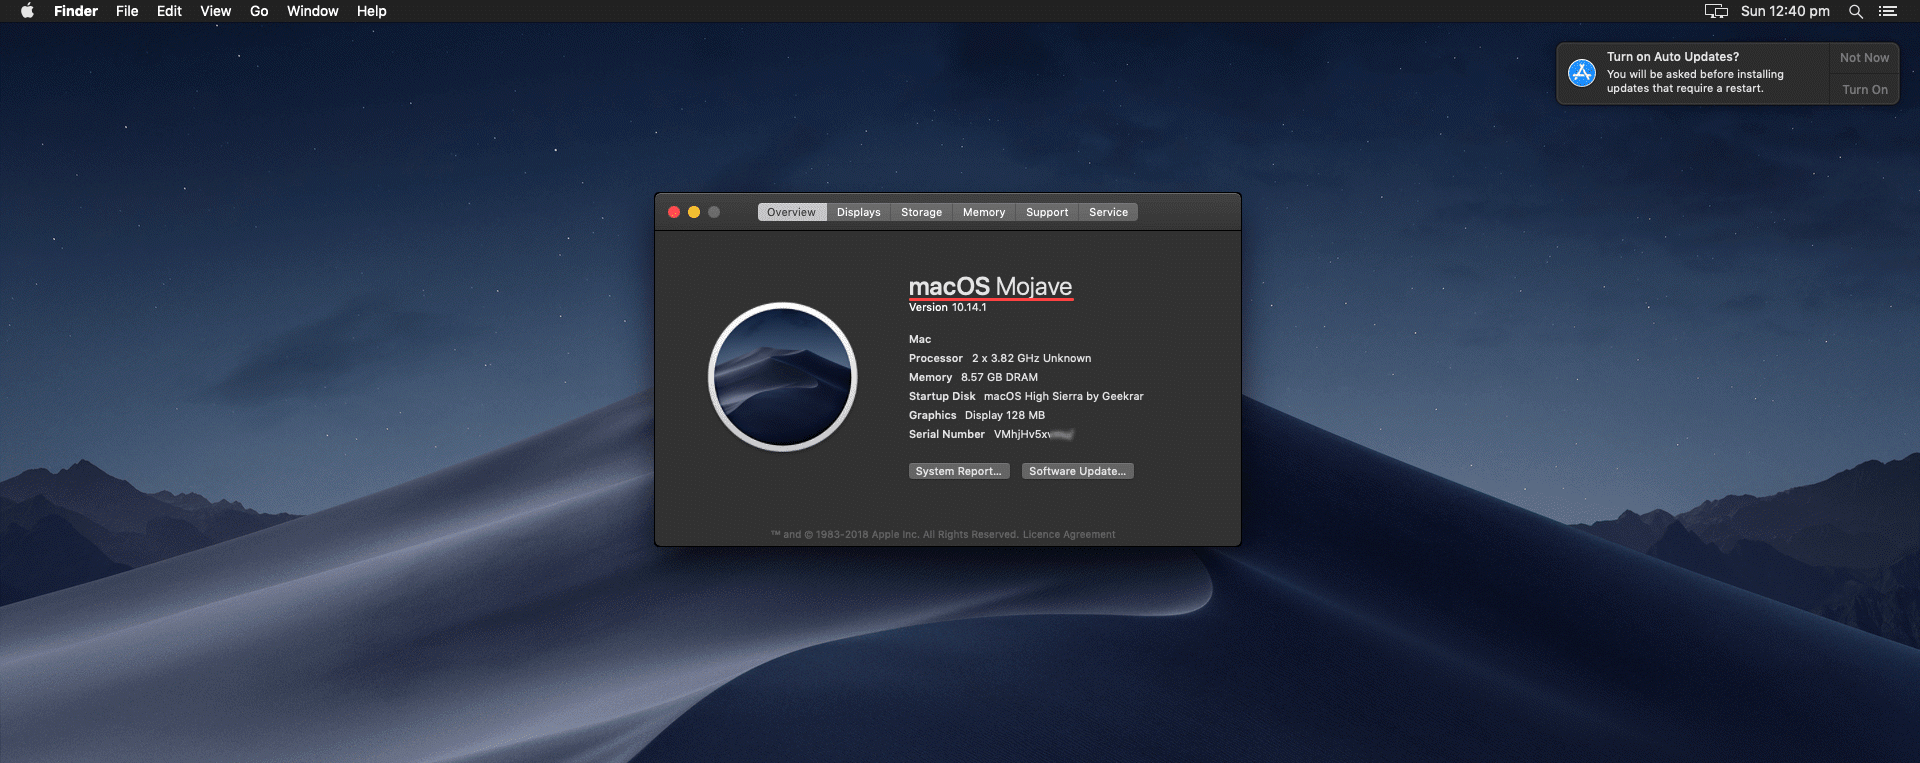 Mac Os Mojave Latest Version Download